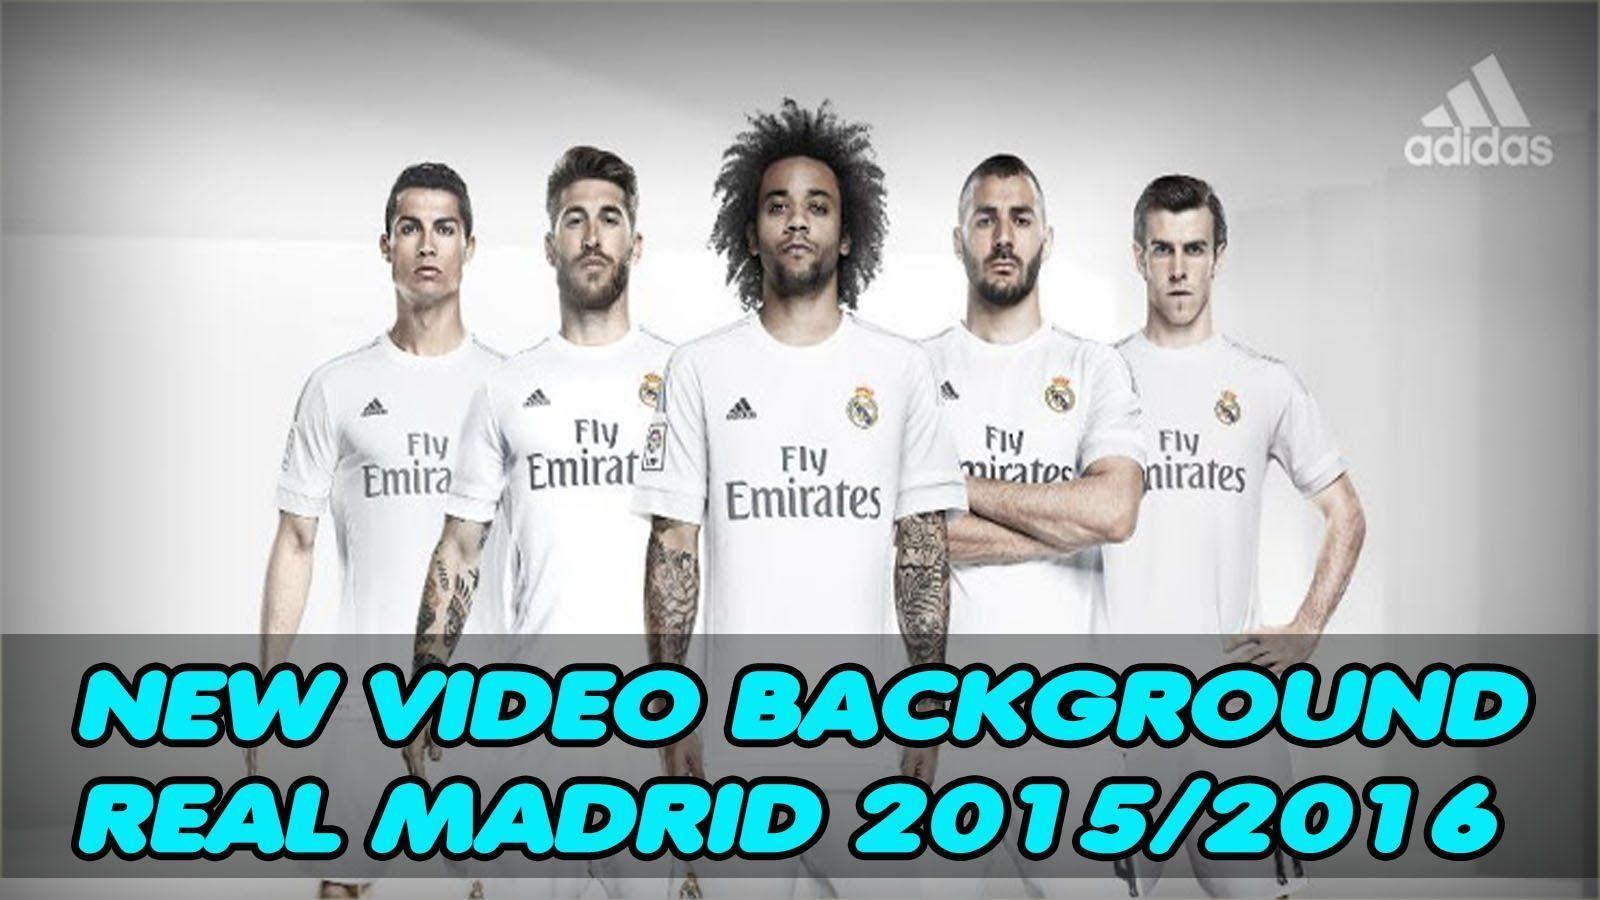 NEW VIDEO BACKGROUND REAL MADRID 2015 2016